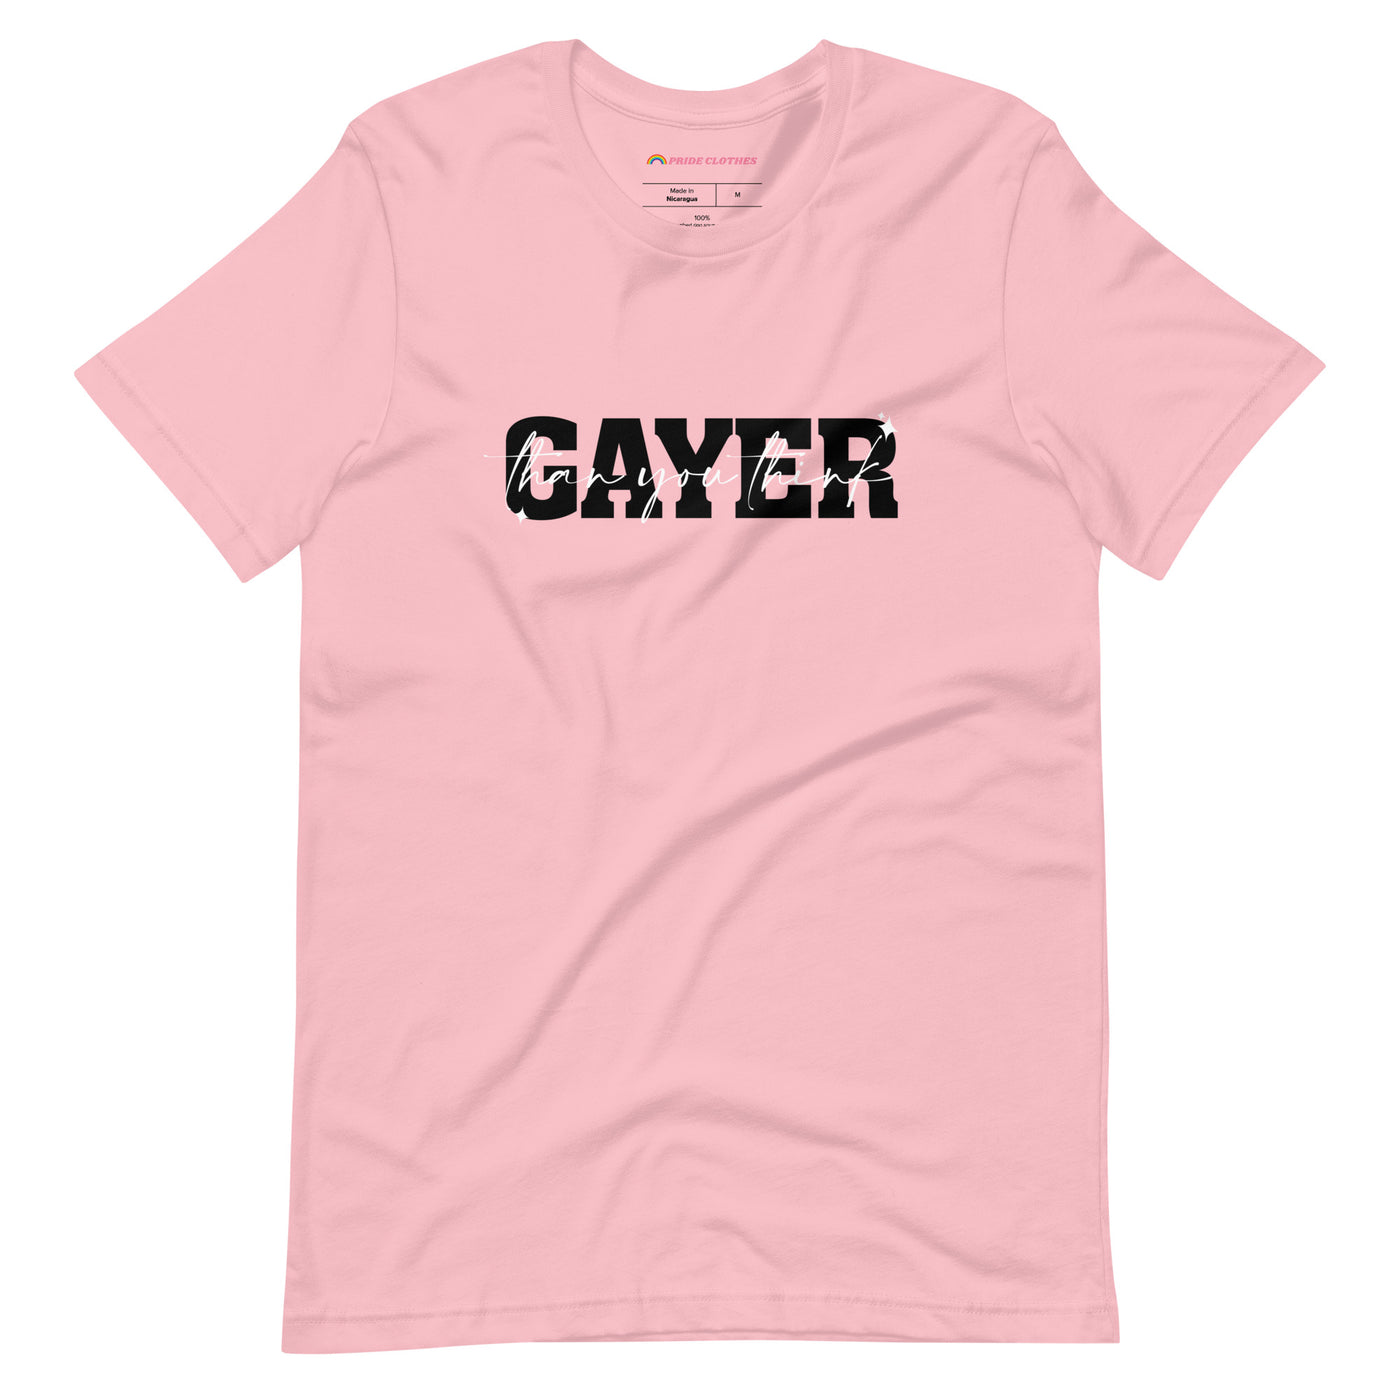 Pride Clothes - Hands Up in the Air and Show That Your Gayer T-Shirt - Pink